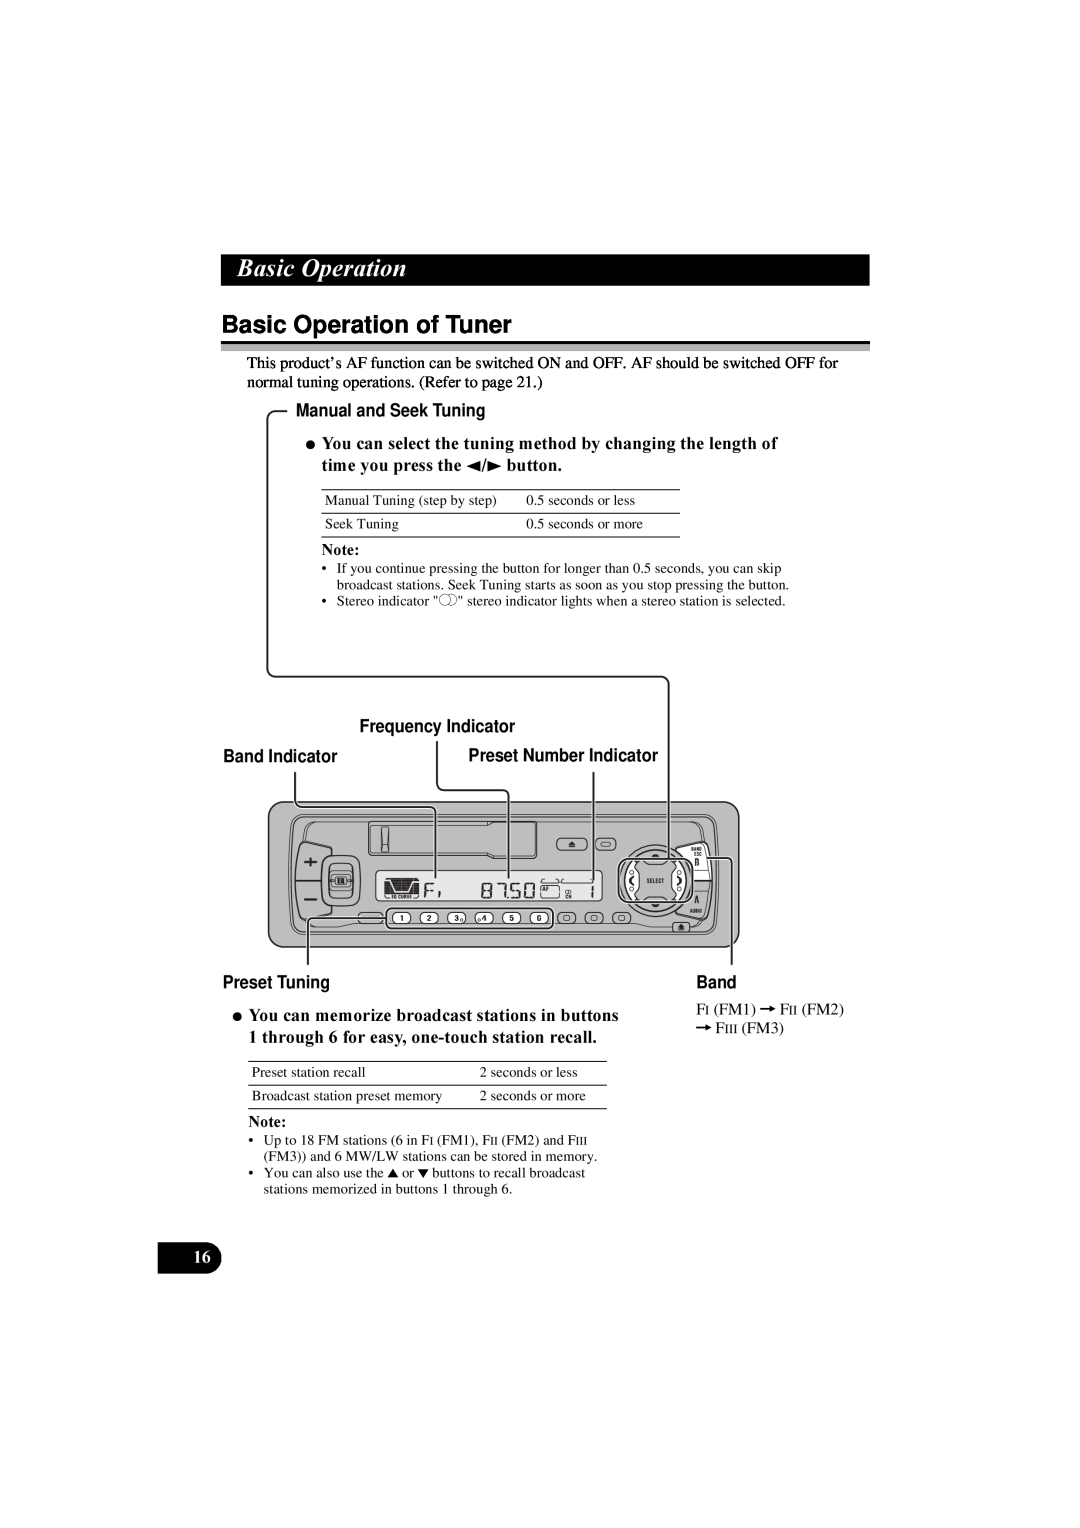 Pioneer KEH-P5900R Basic Operation of Tuner, Manual and Seek Tuning, Frequency Indicator, Band Indicator, Preset Tuning 